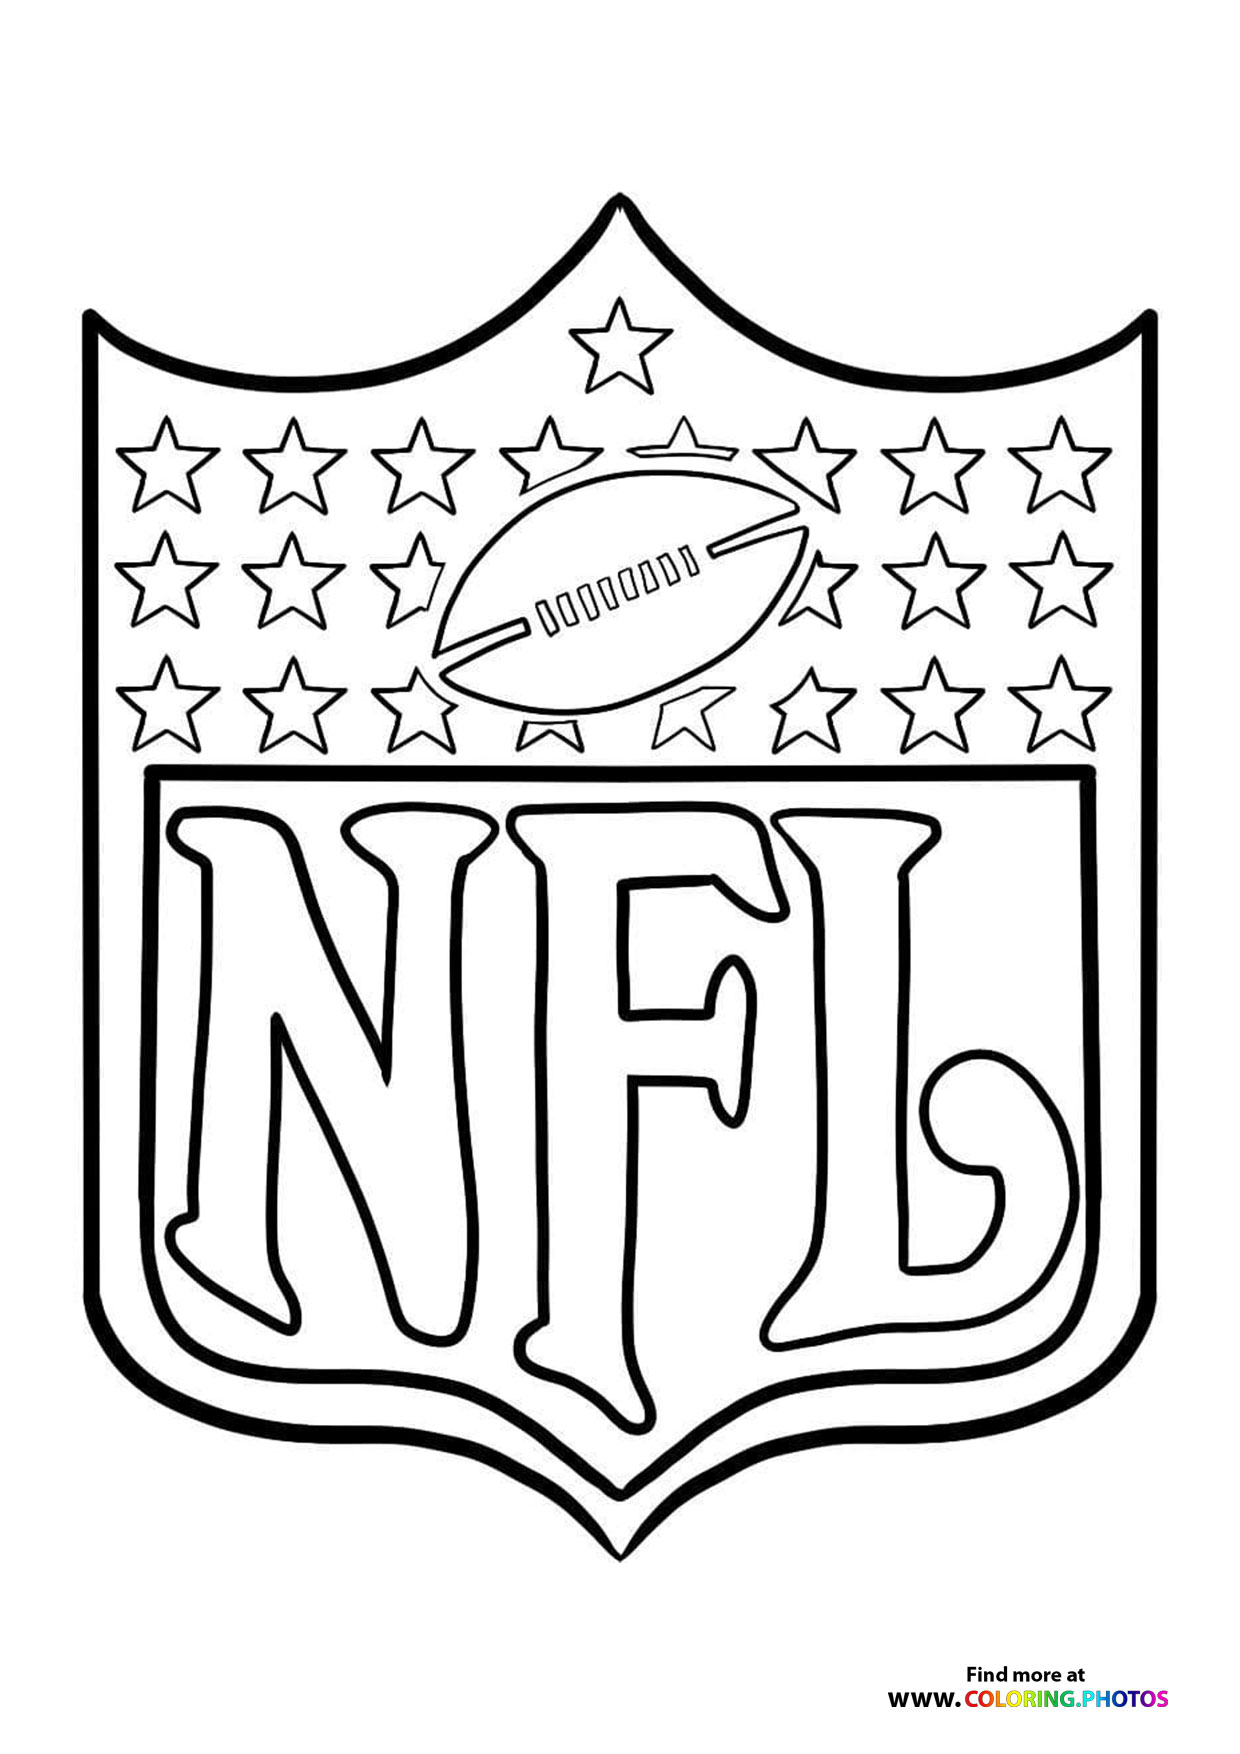 NFL Football - Coloring Pages for kids ...